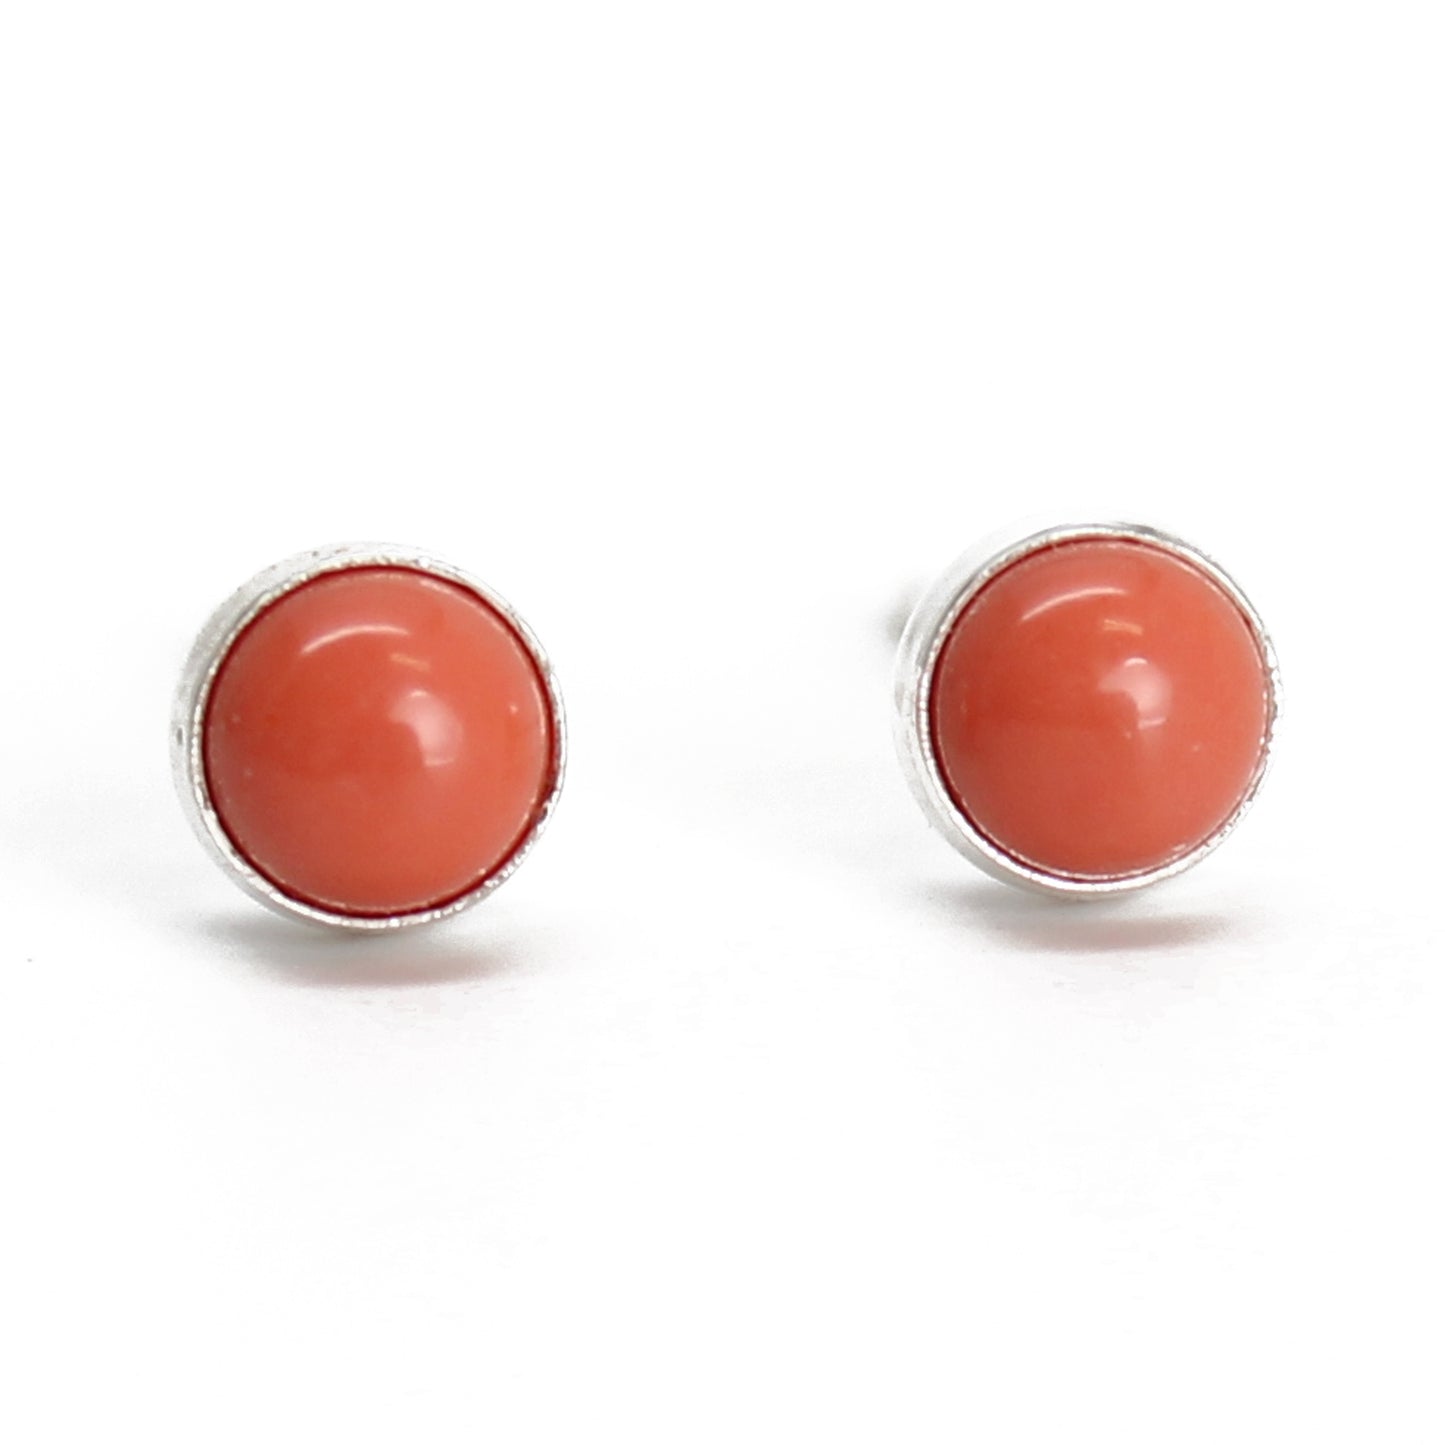 Artisan Czech Glass Stacked Rondelle Earrings in Coral, Peach, and Ant|  Ardent Hearts Designs